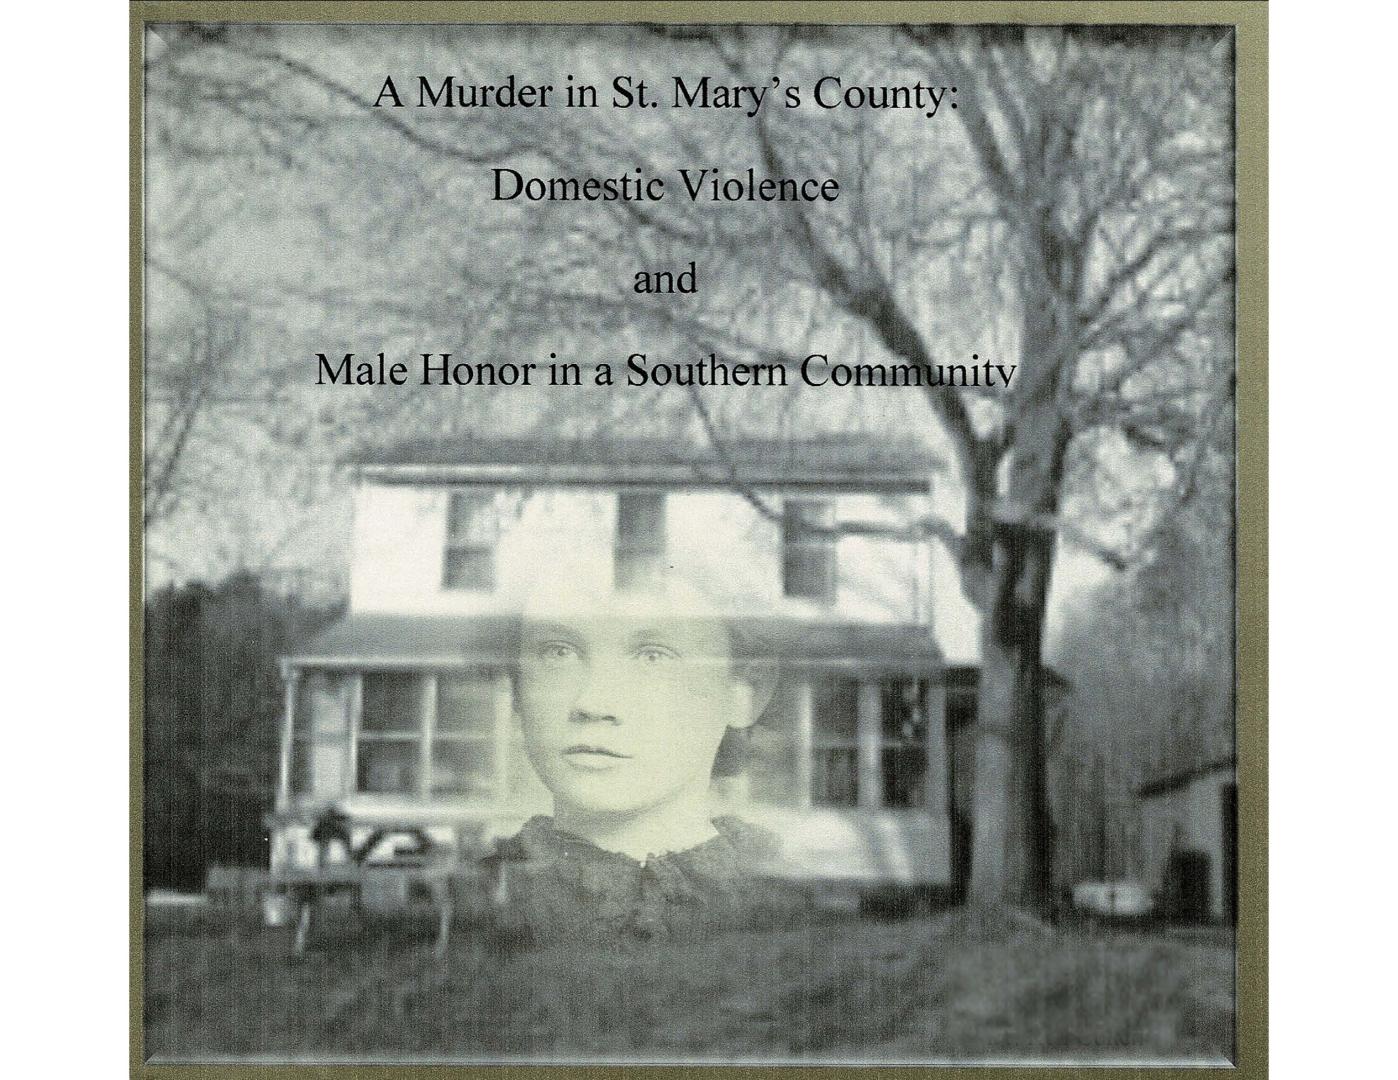 Historically Speaking: A Murder in St. Mary's County